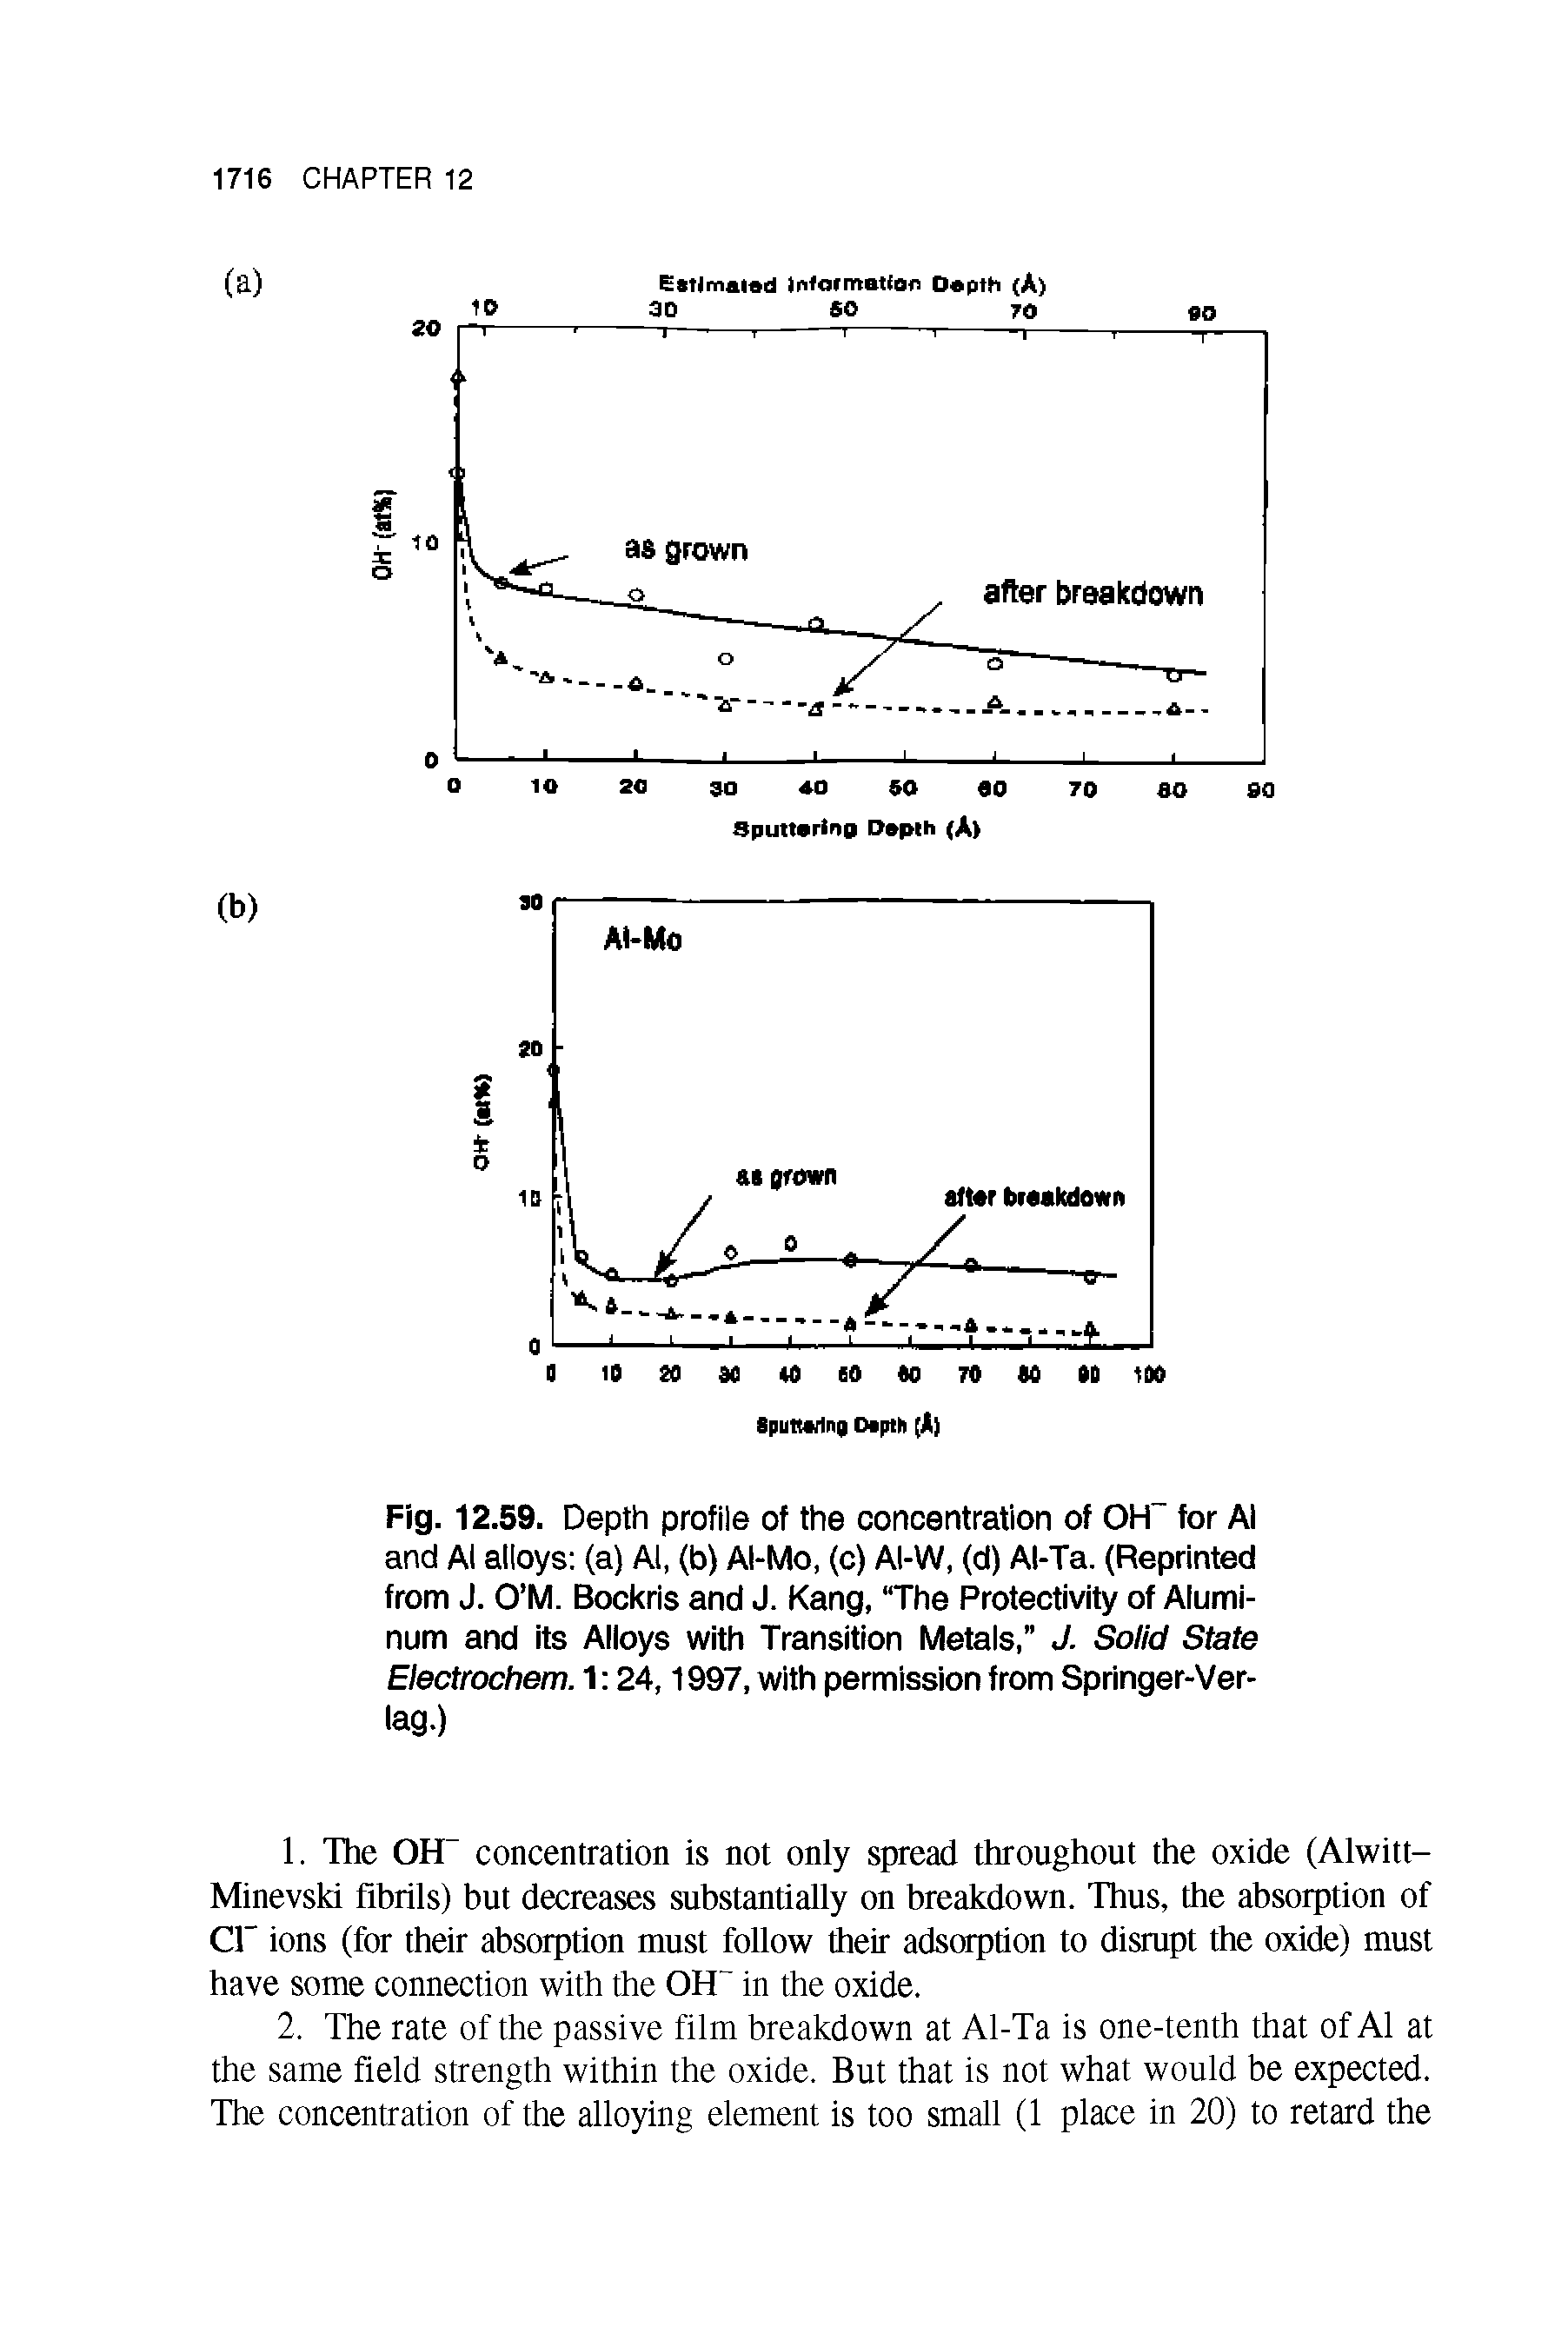 Fig. 12.59. Depth profile of the concentration of OH for Al and Al alloys (a) Al, (b) Al-Mo, (c) Al-W, (d) Al-Ta. (Reprinted from J. O M. Bockris and J. Kang, The Protectivity of Aluminum and its Alloys with Transition Metals, J. Solid State Electrochem. 1 24,1997, with permission from Springer-Ver-lag.)...